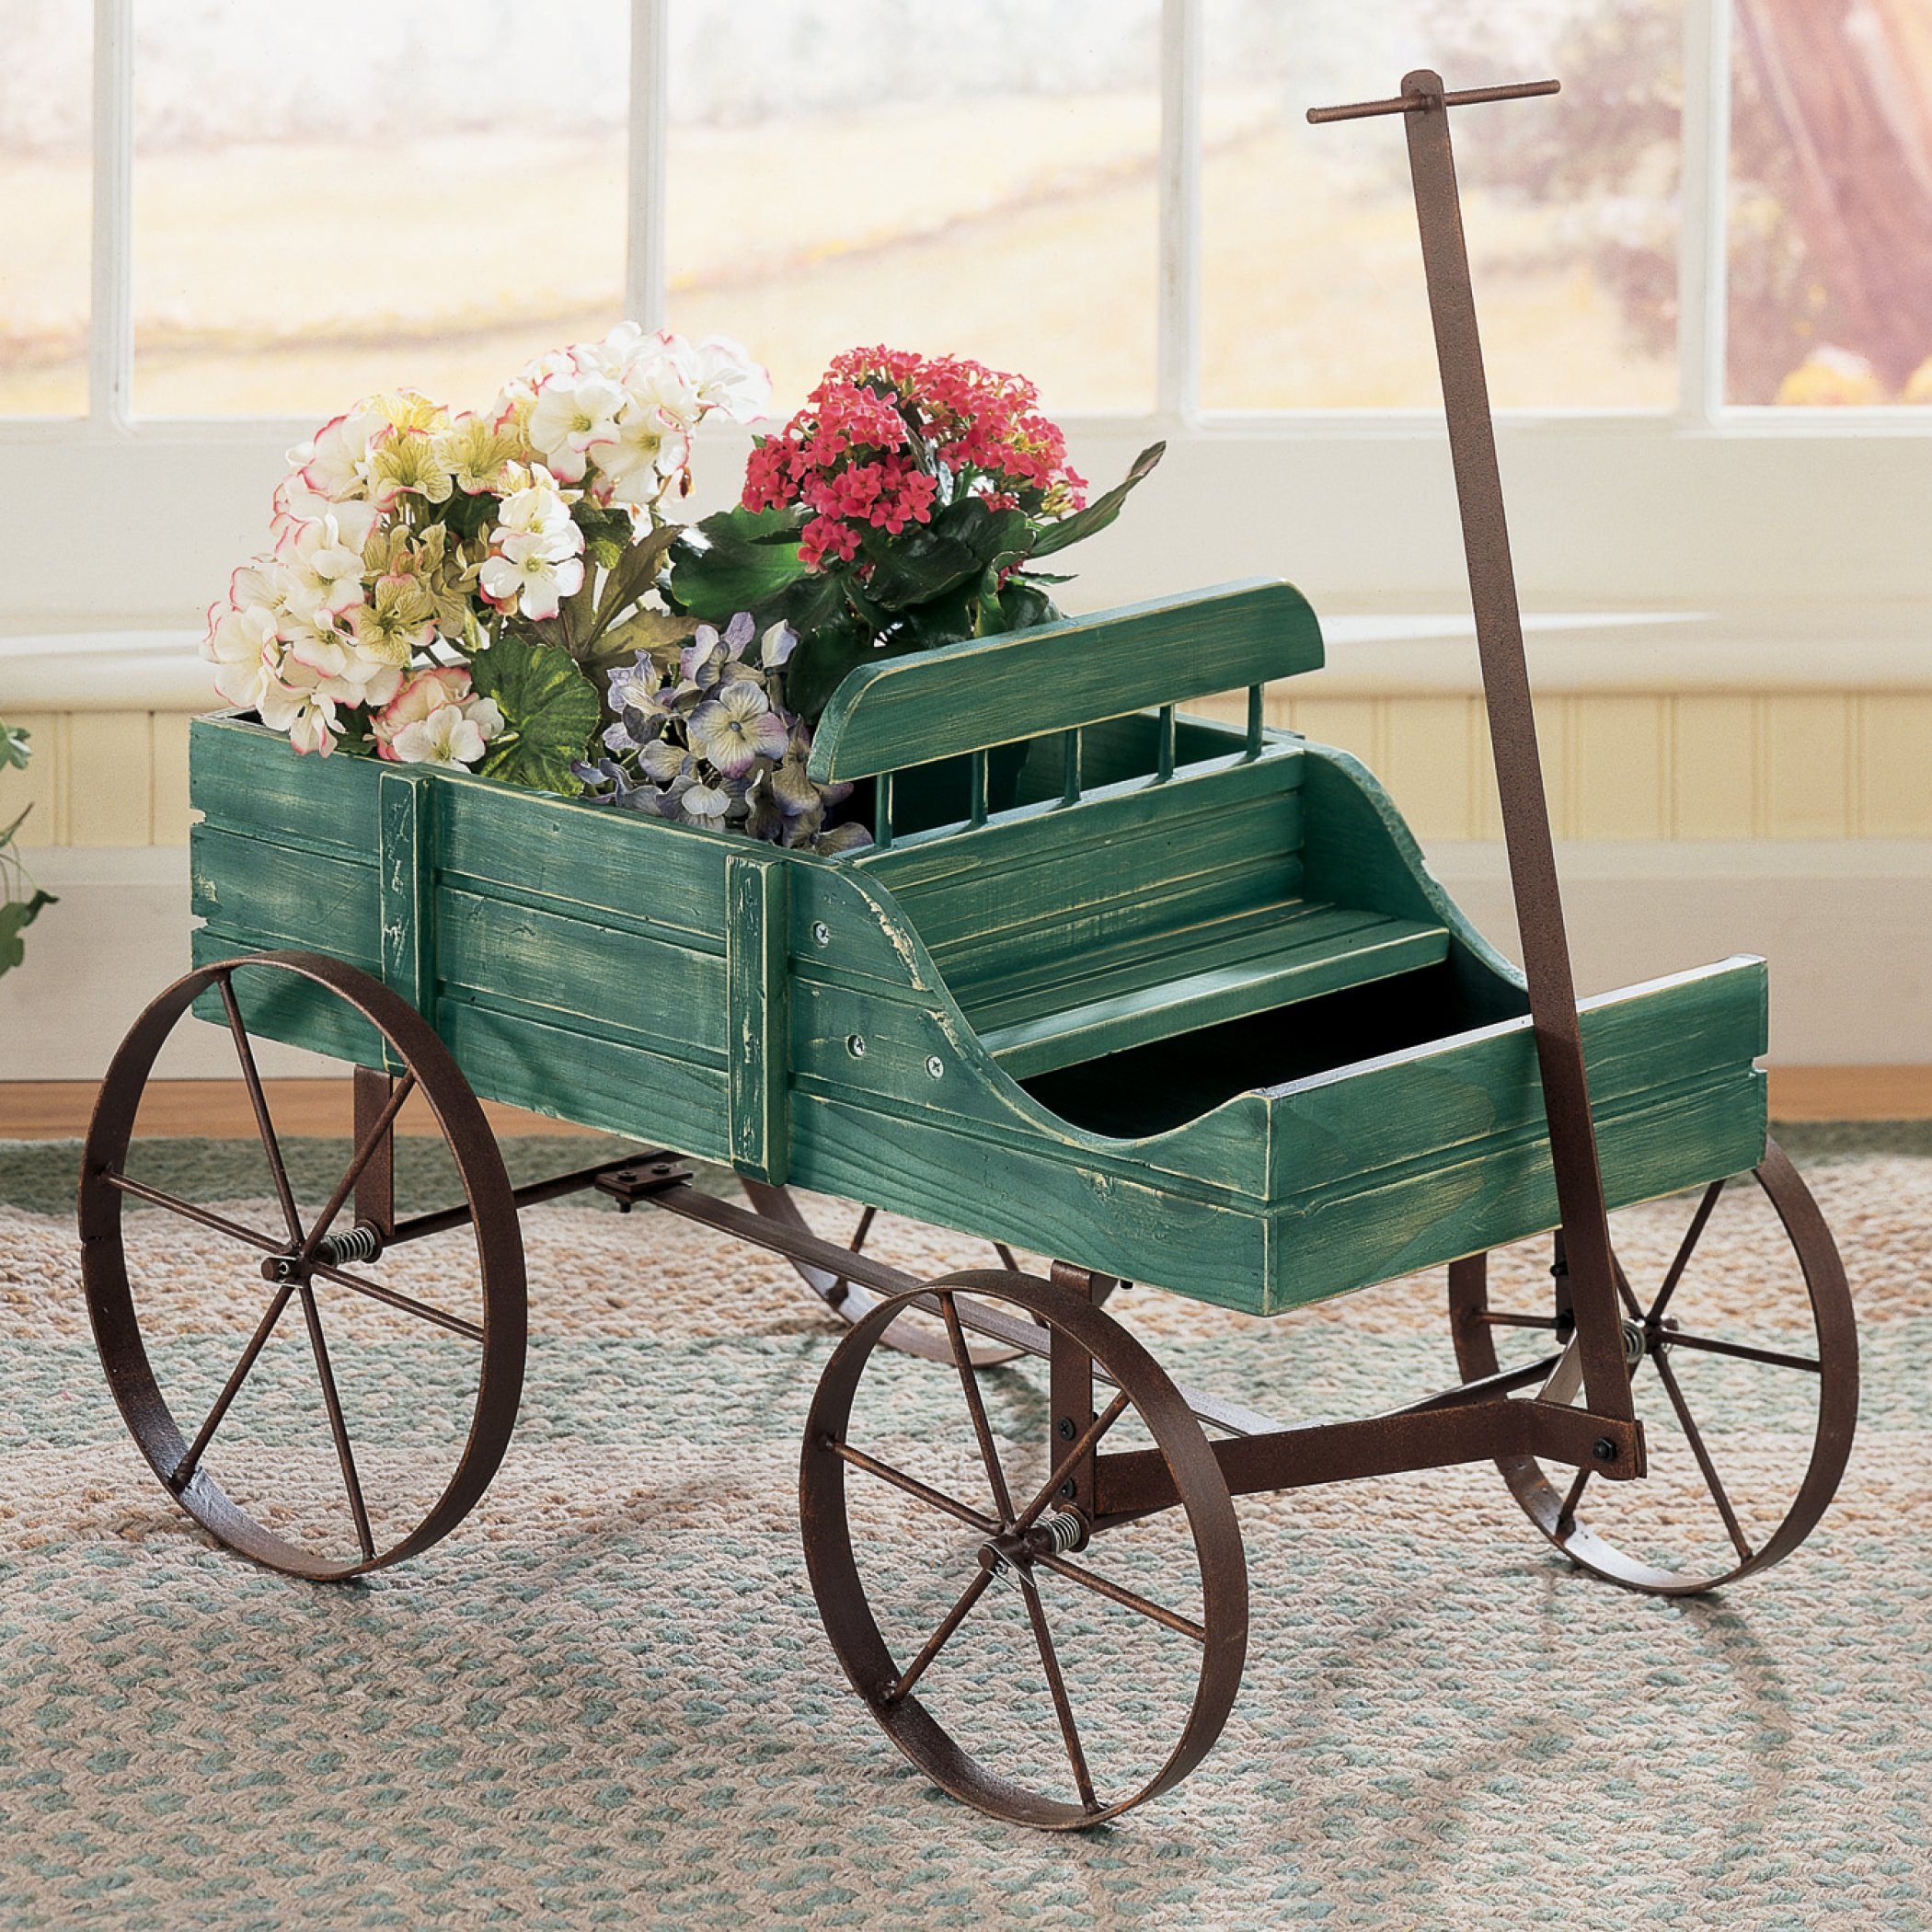 Collections Etc Amish Wagon Indoor/Outdoor Decorative Planter - Green - image 3 of 4